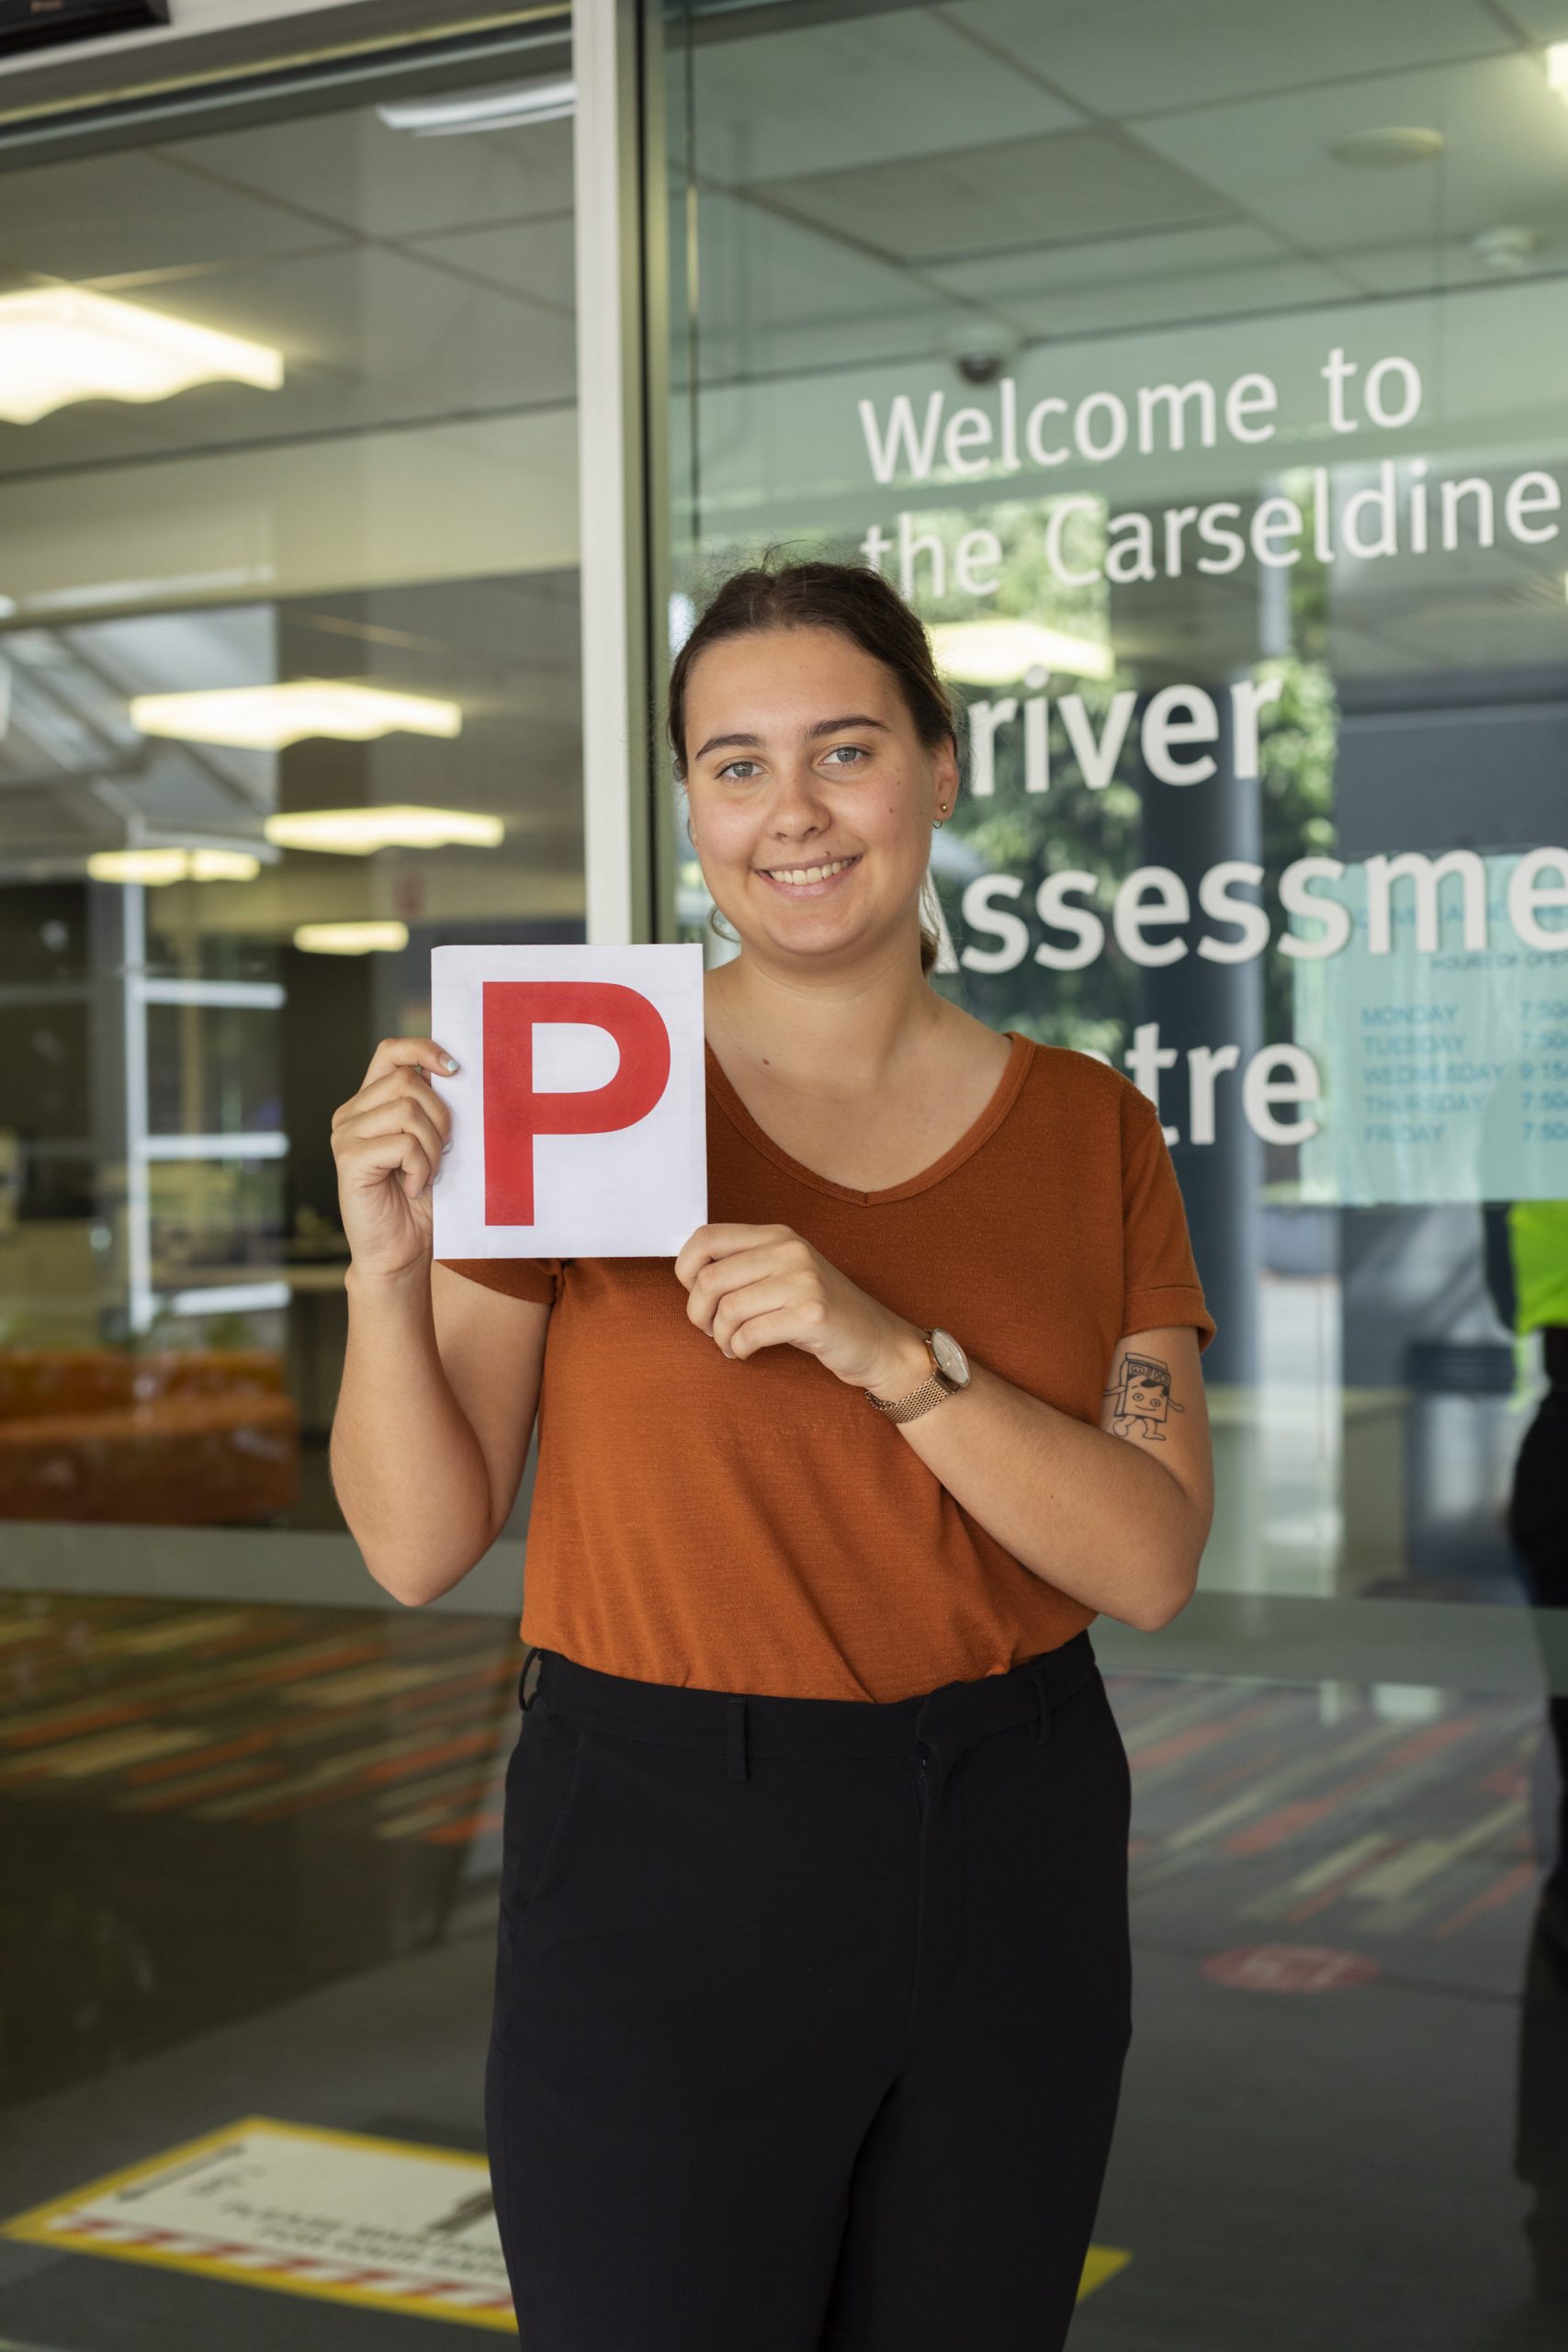 Young driver holding P plate at Carseldine Driver Assessment Centre